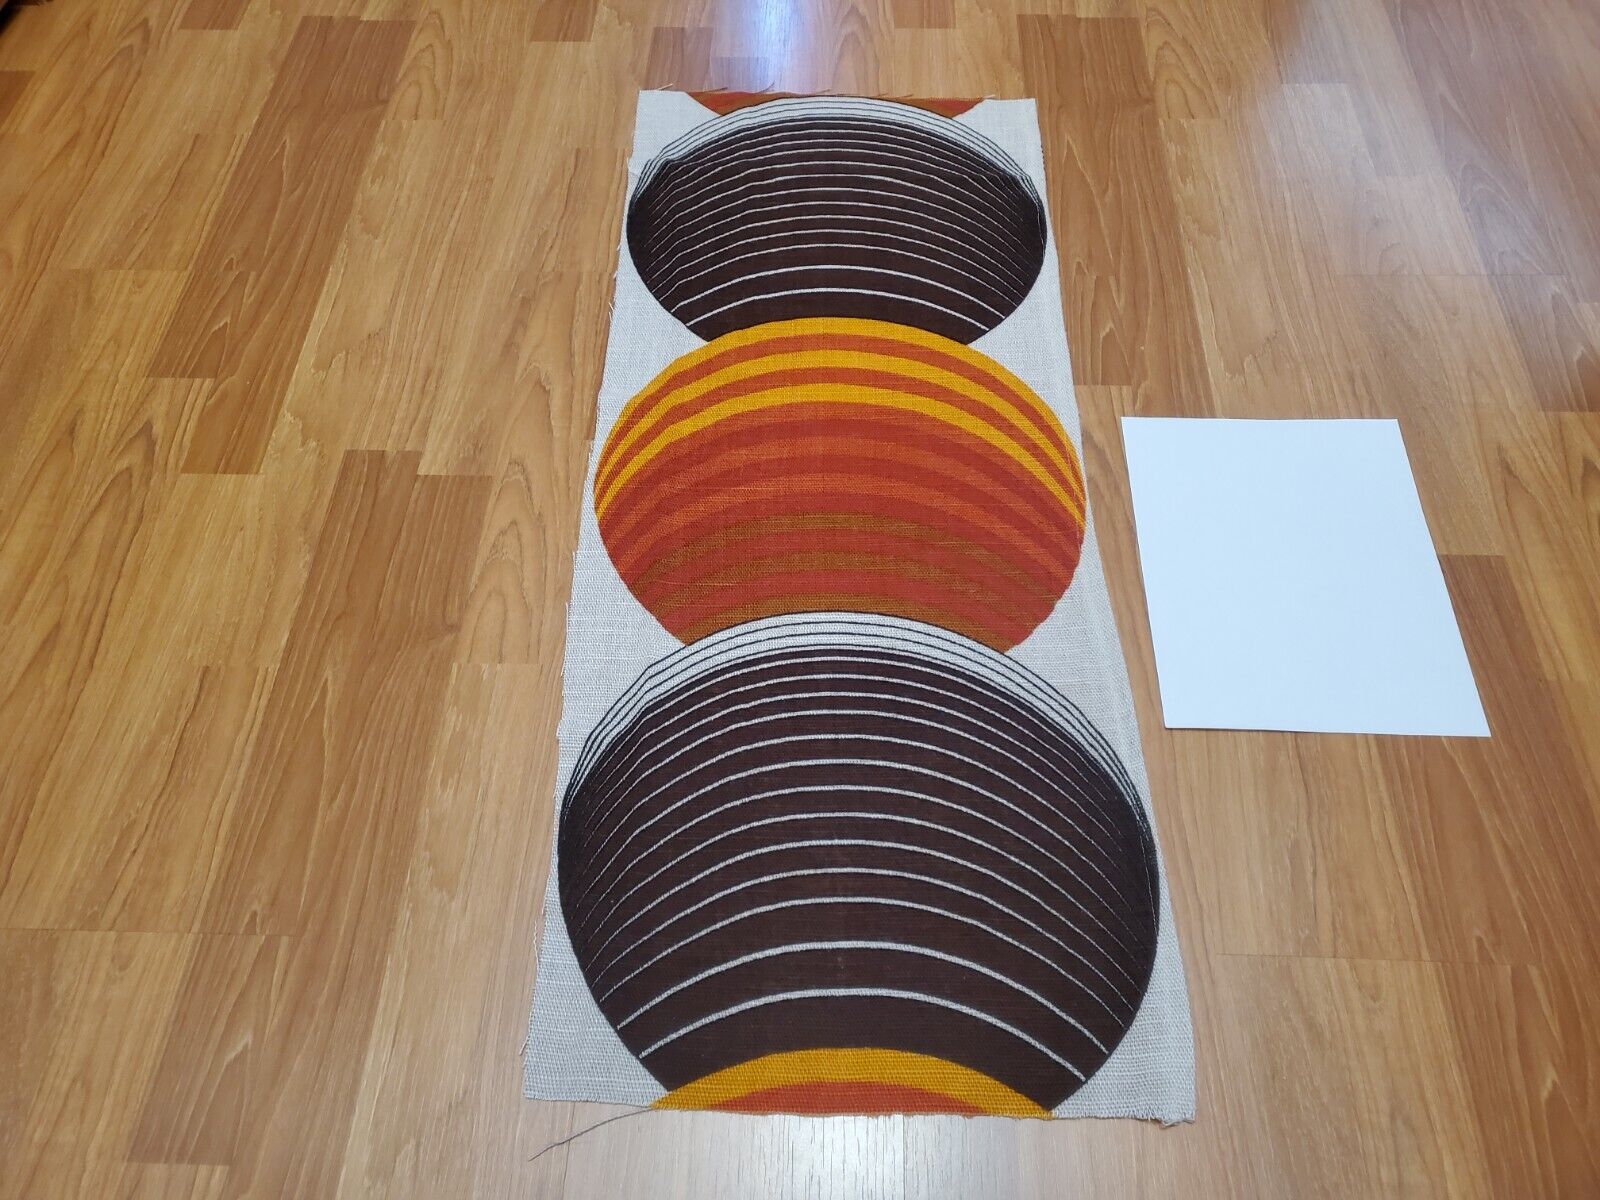 Awesome RARE Vintage Mid Century retro 70s org brn striped spheres sml fabric